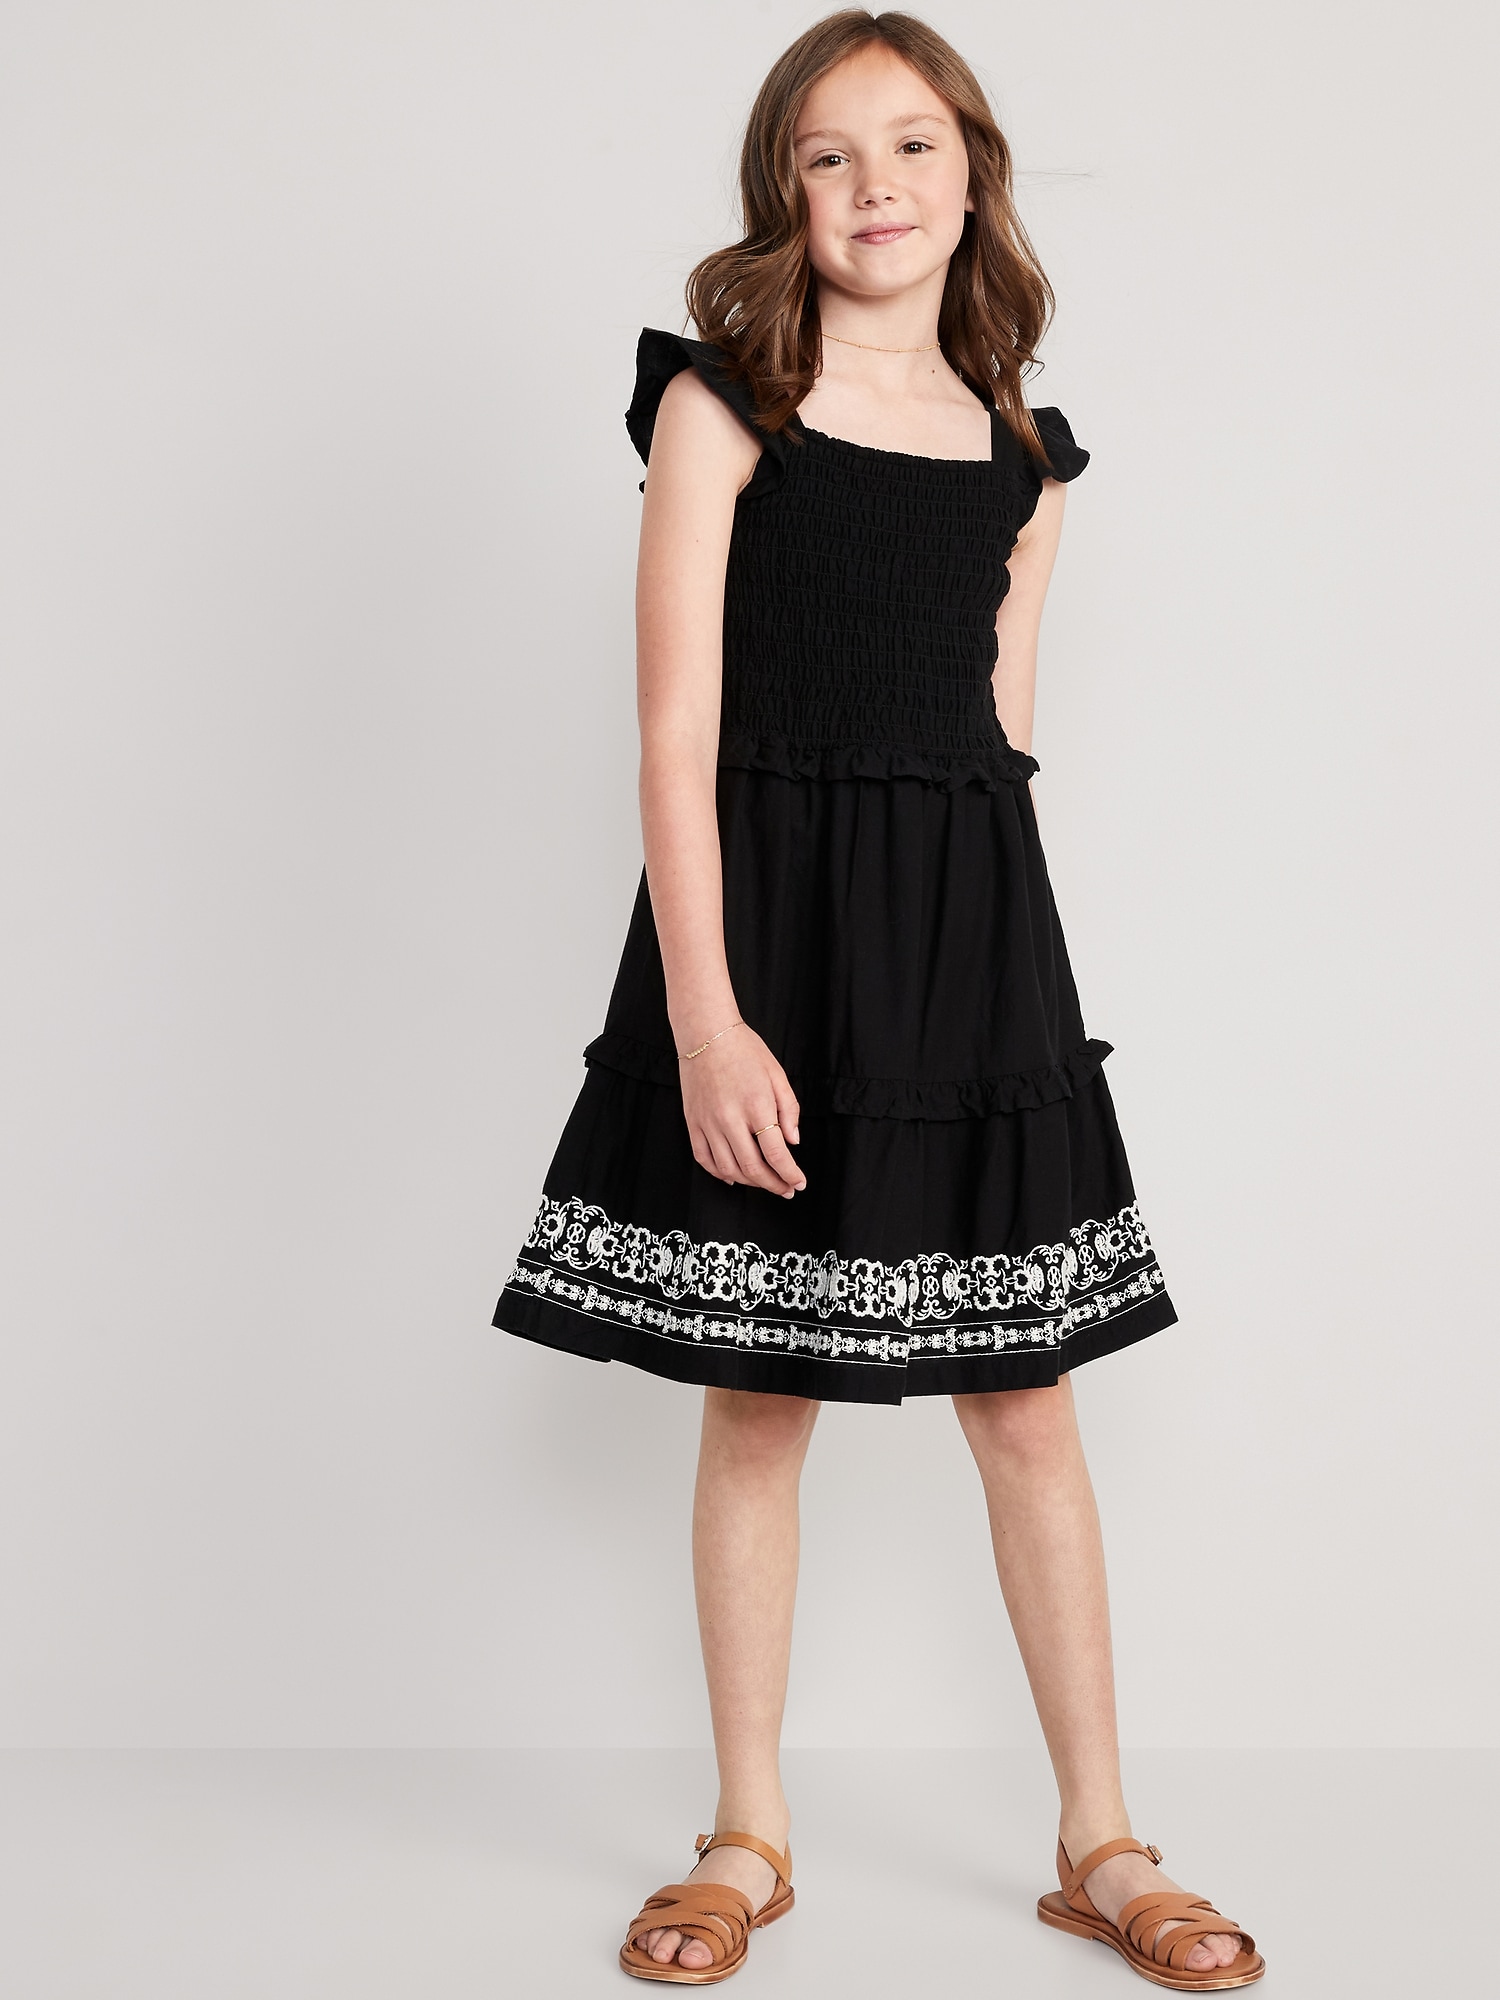 Matching Sleeveless Tiered Embroidered Fit & Flare Dress for Girls